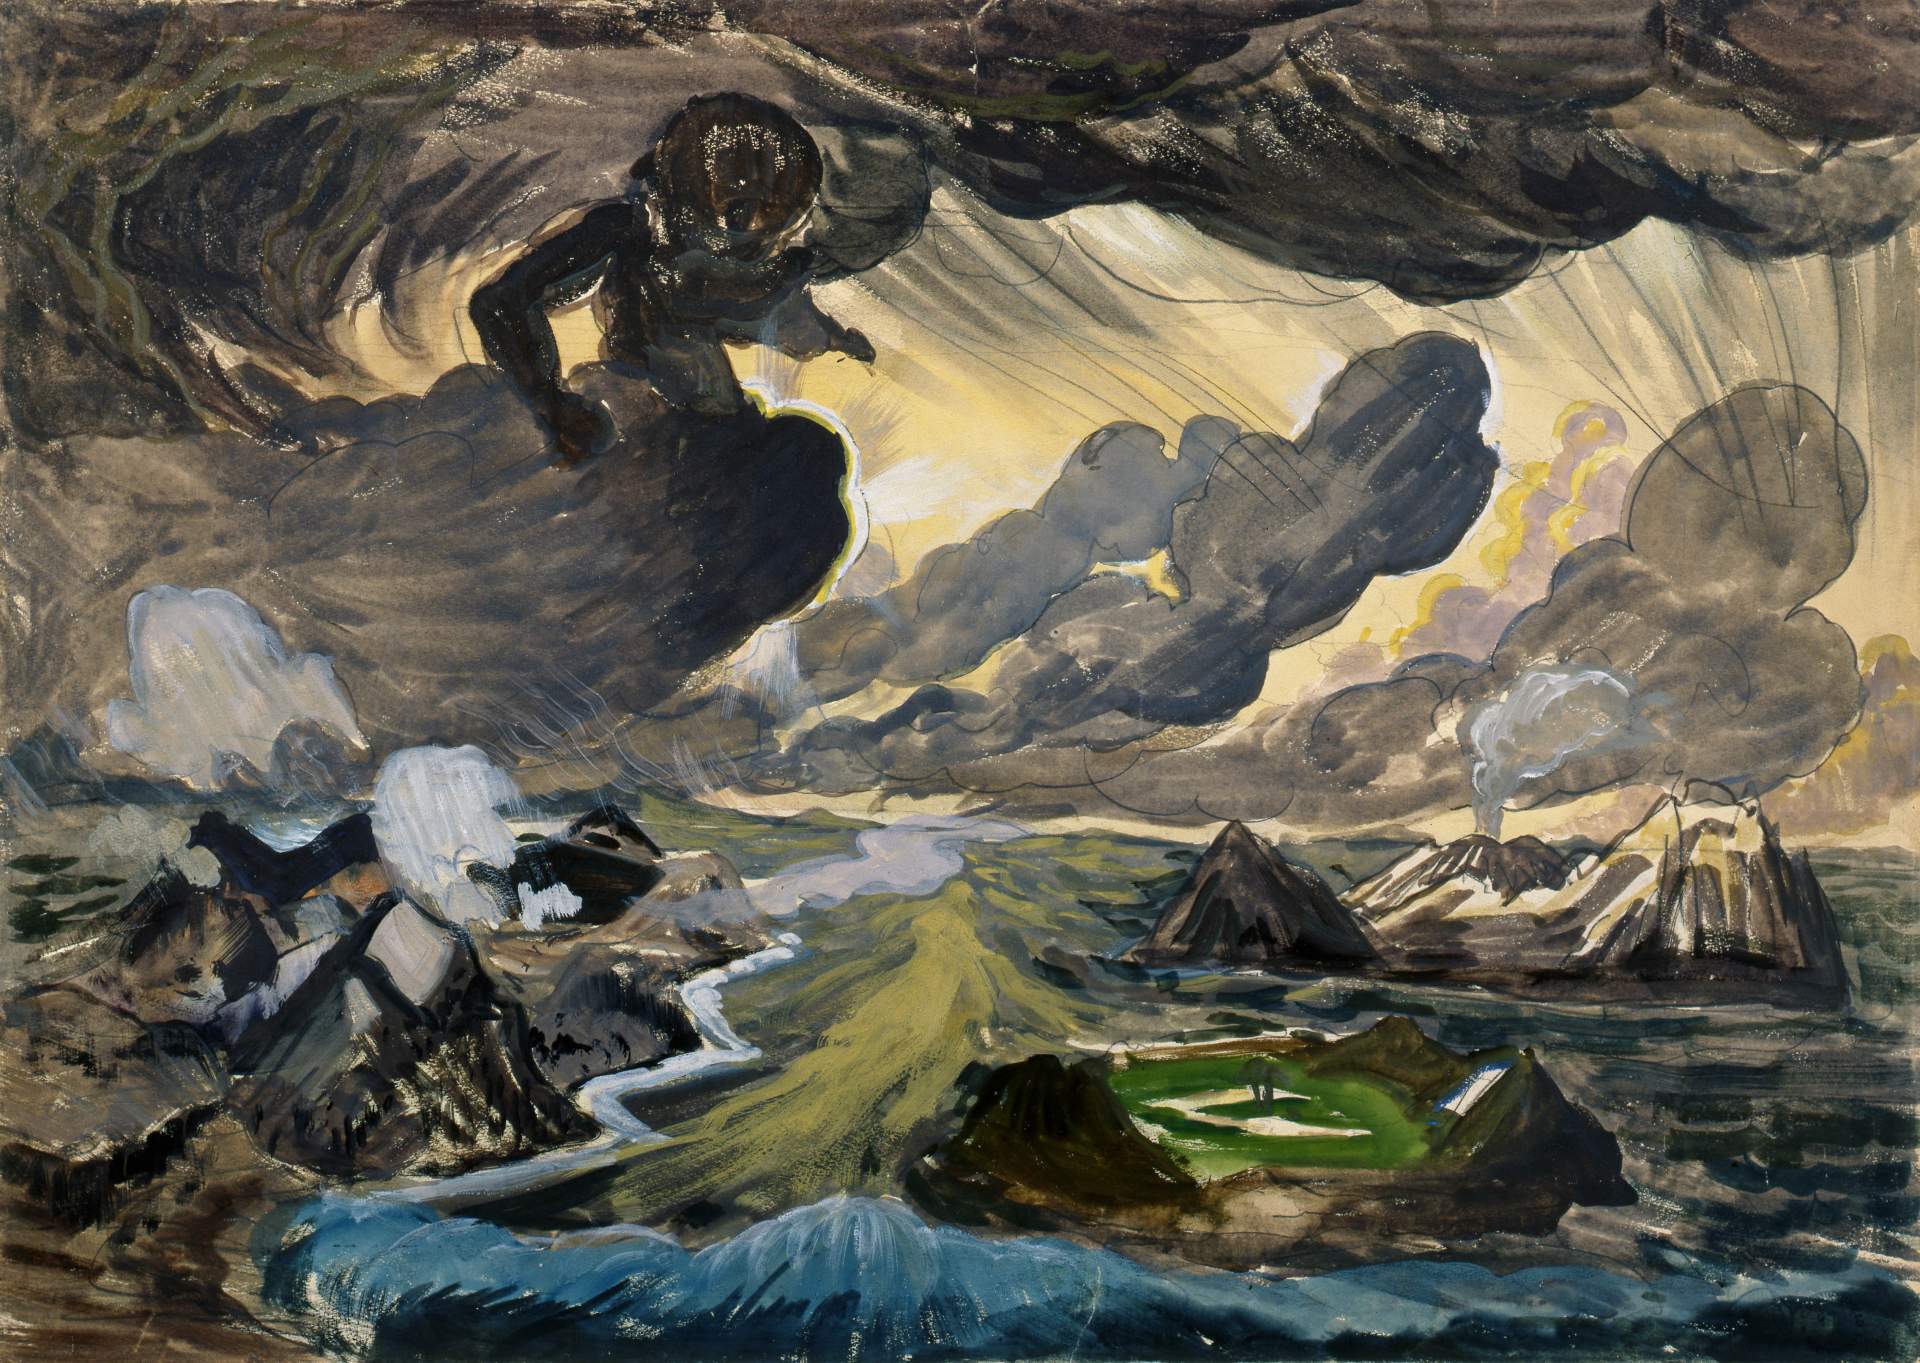 Charles Burchfield Collection of the Burchfield Center